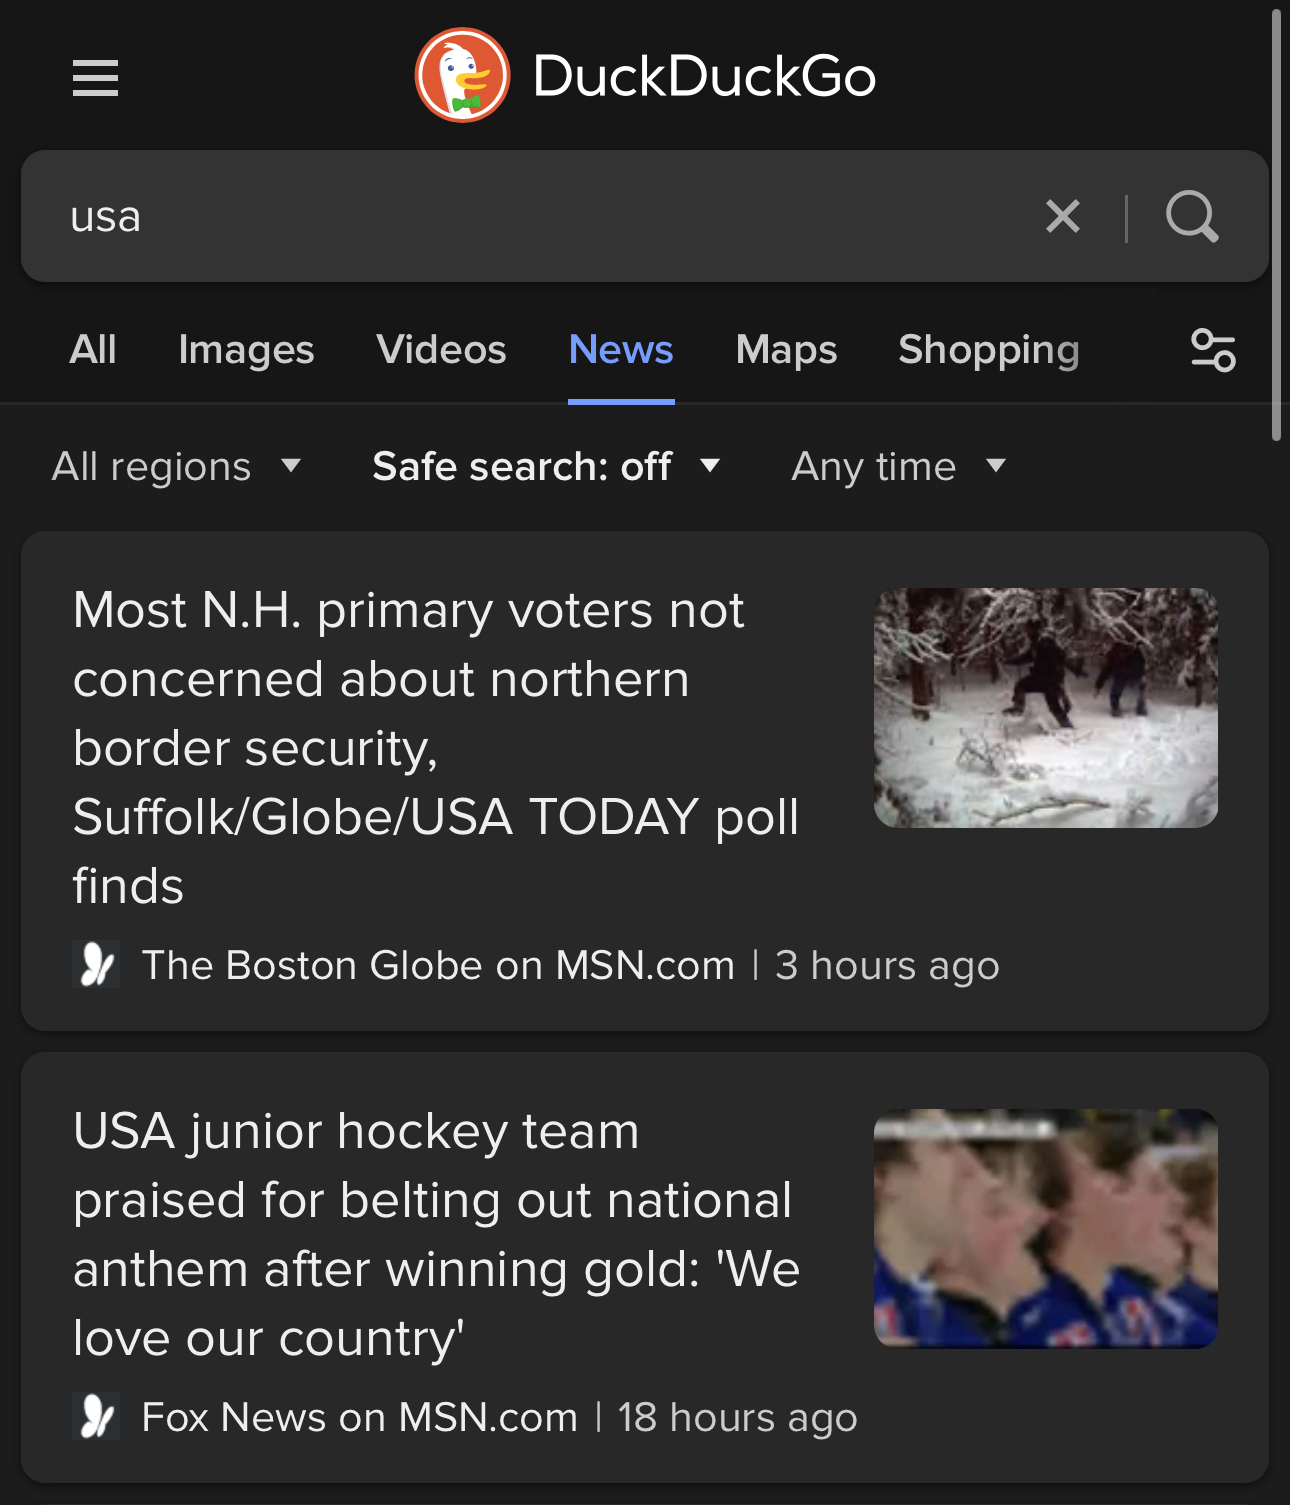 Screenshot of a smartphone displaying a DuckDuckGo search results page for “usa” with two news articles visible. The top article shows a photo of people in winter clothing in a snowy forest. The bottom article features an image of a junior hockey team